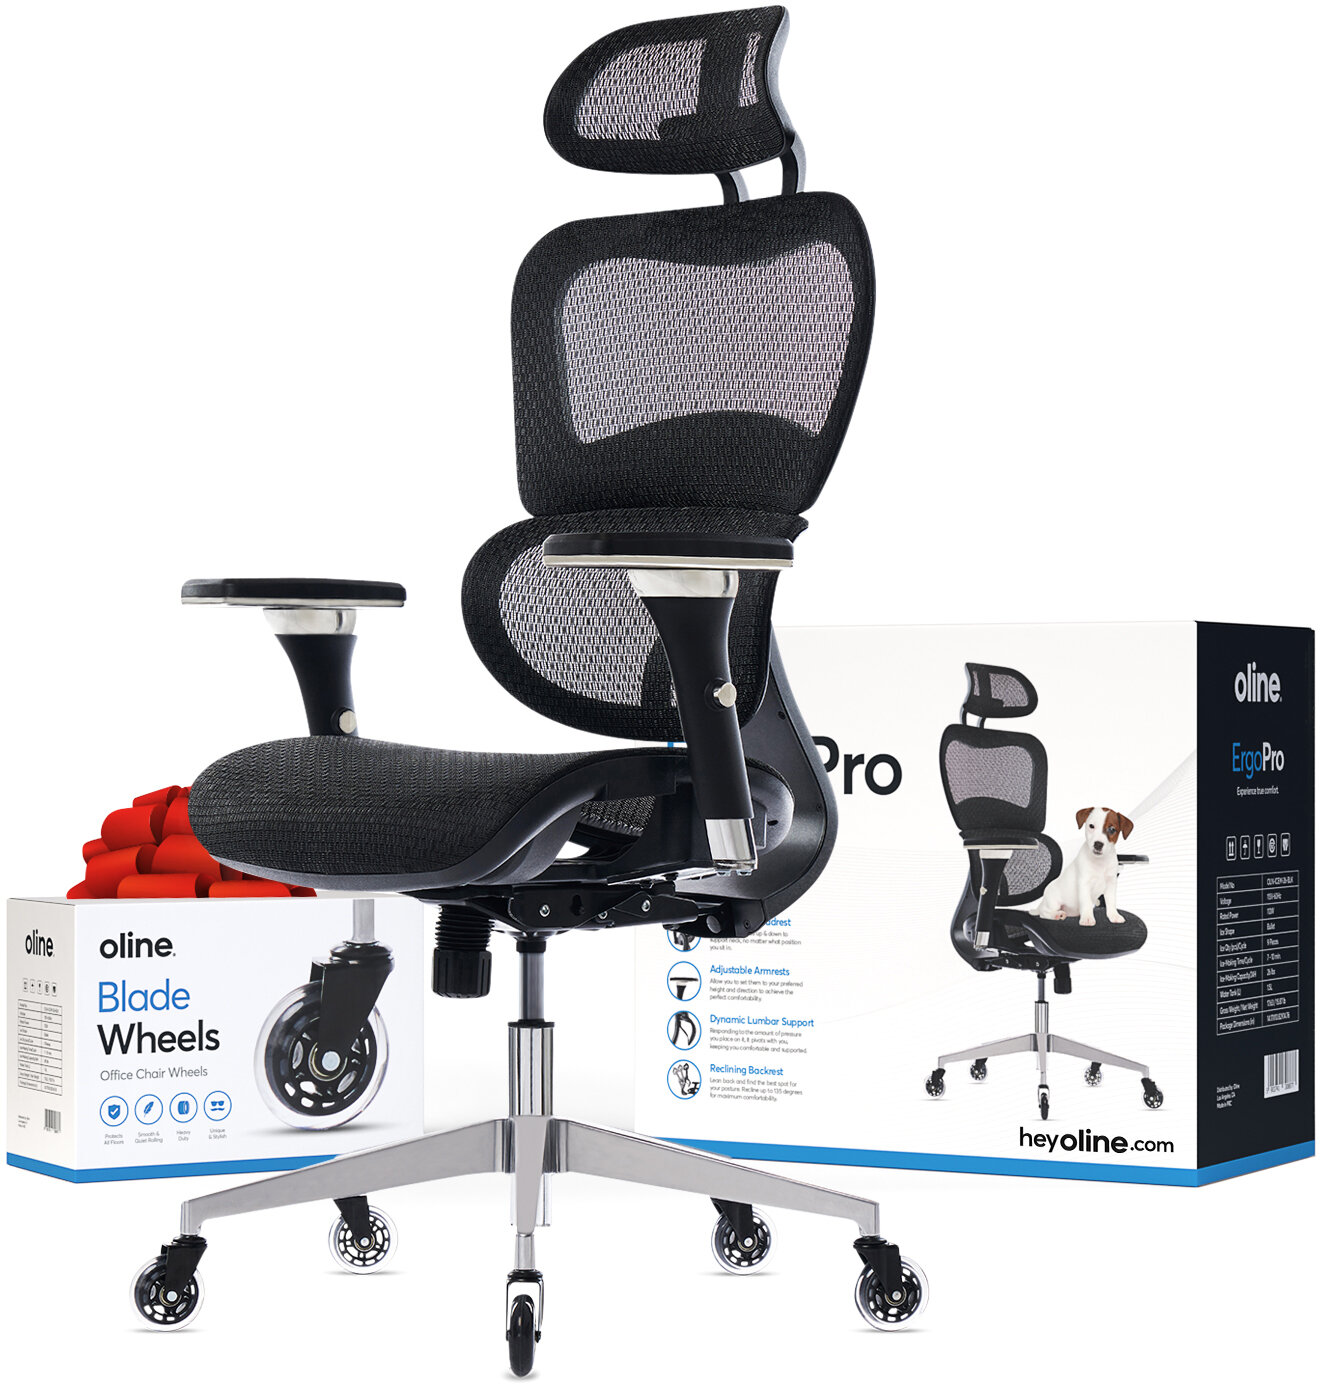 Ergonomic Office Chair Executive Chair Flip Up Armrest Computer Chair  Adjustable Height High Back Task Chairs Lumbar Support Swivel Gaming Desk  Chair